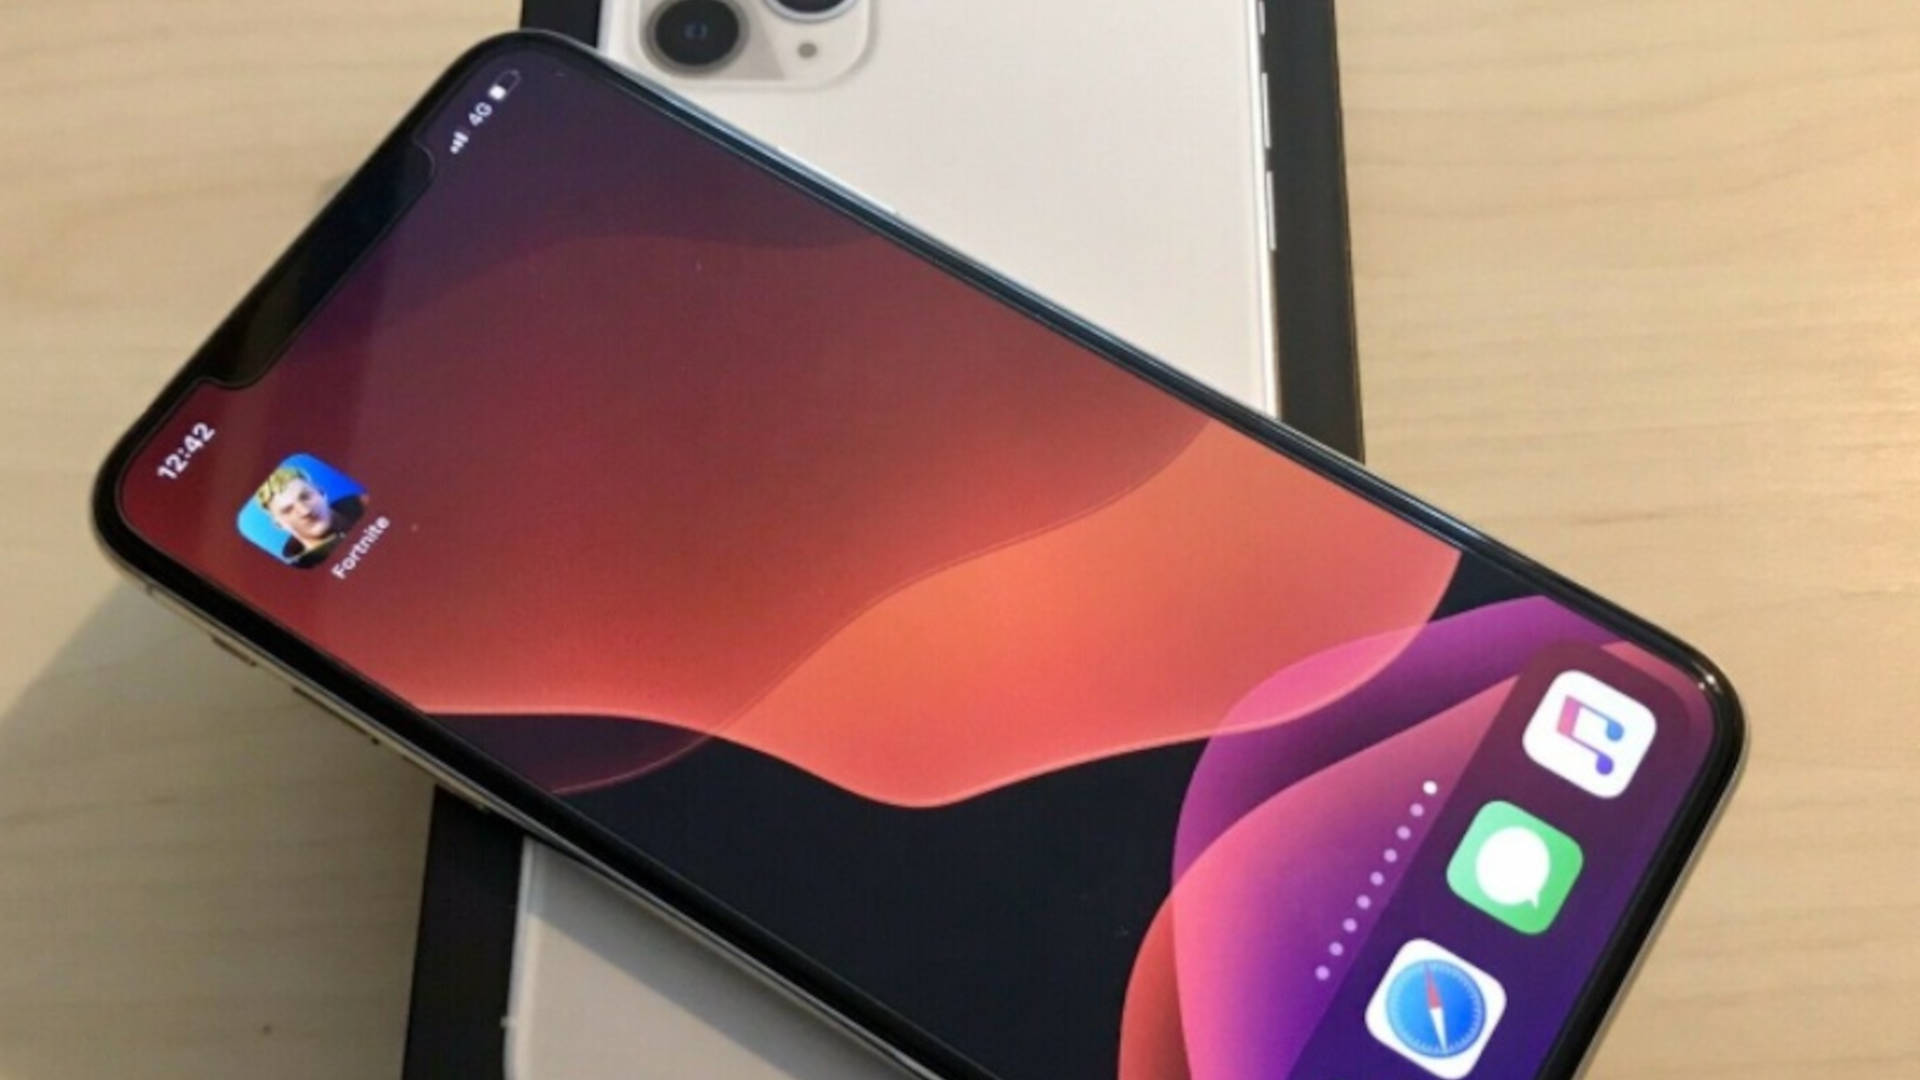 People are selling iPhones with Fortnite installed for £10,000